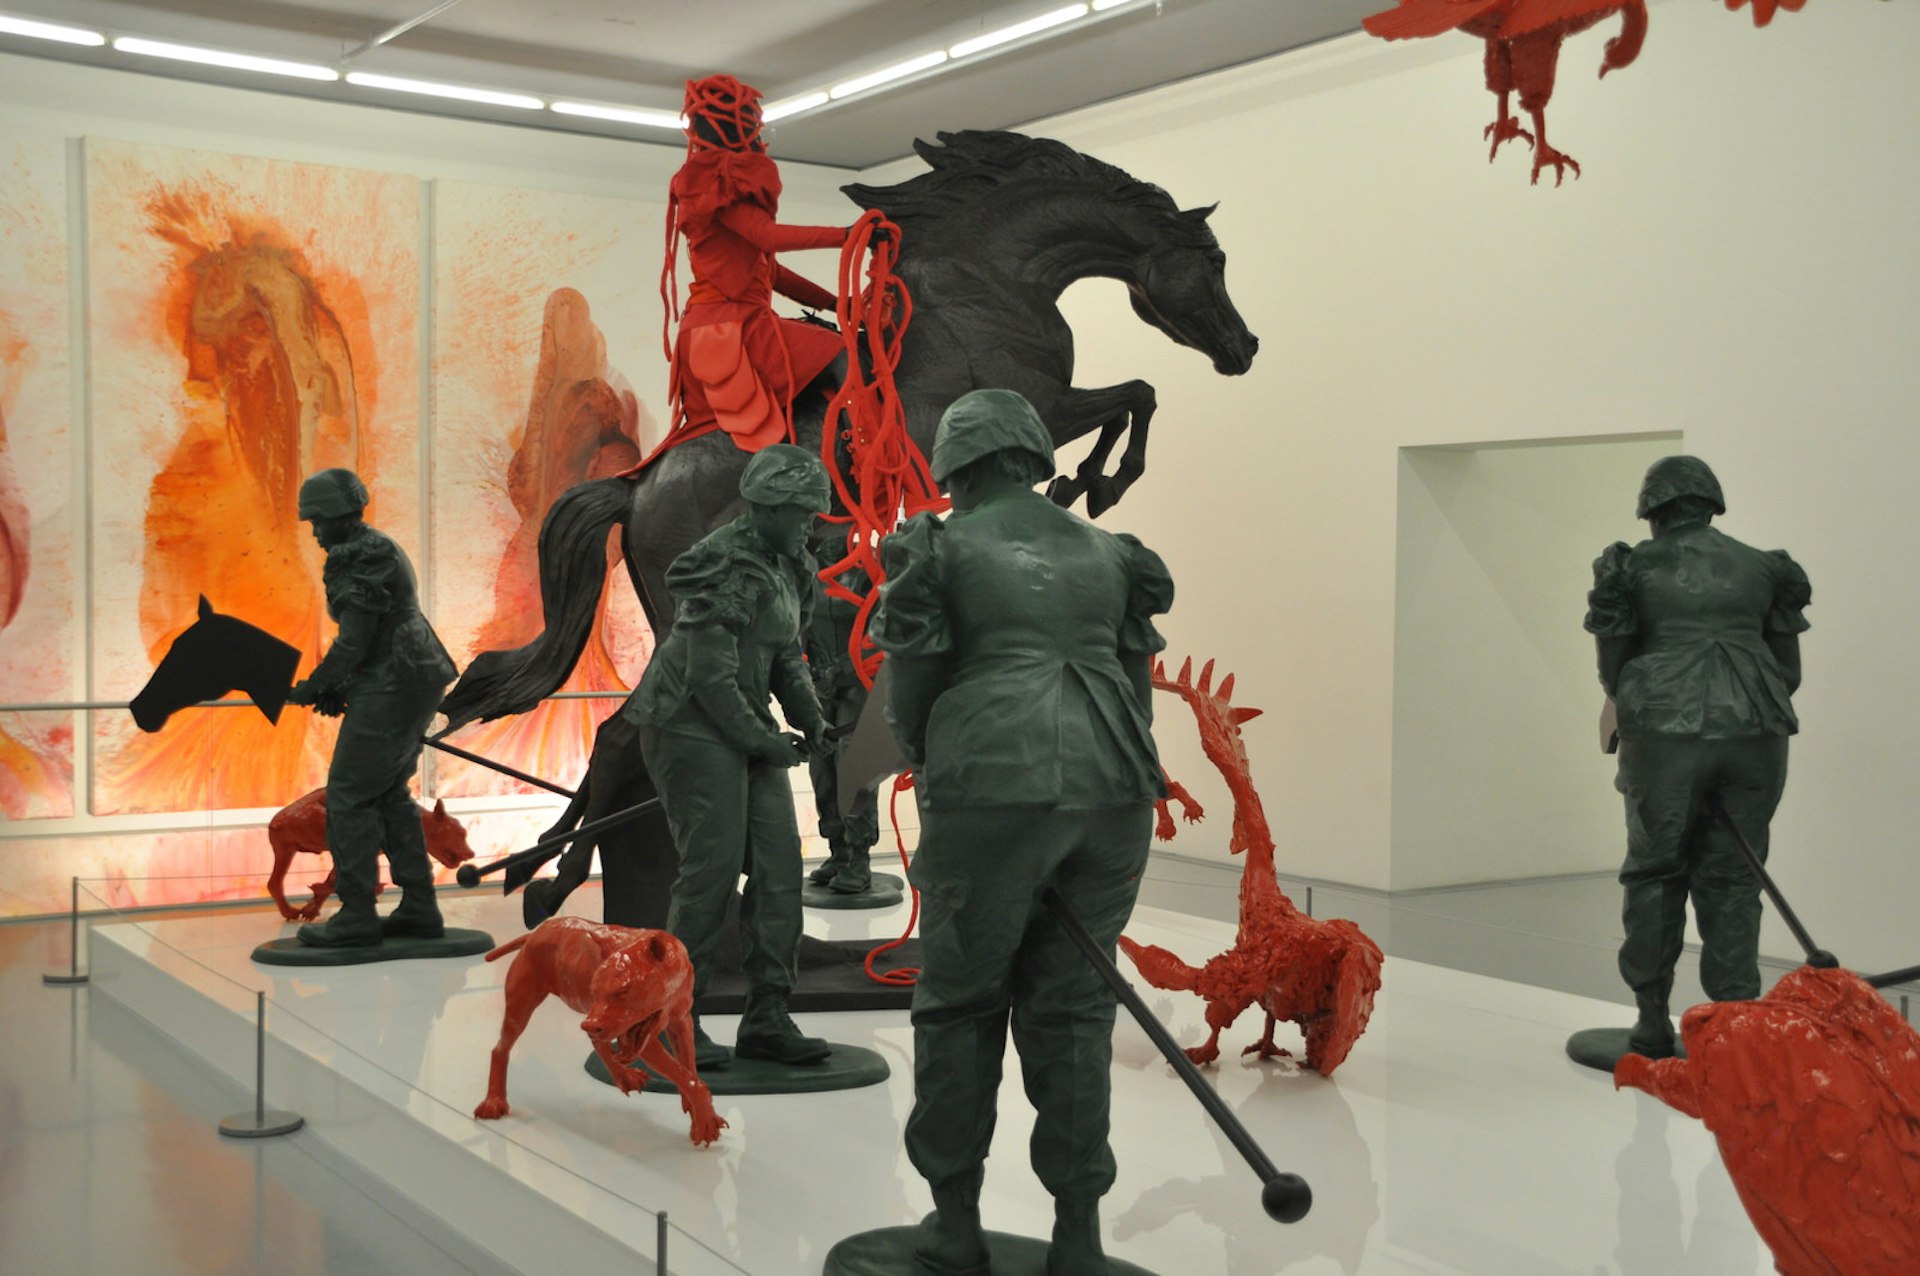 Copper statues of modern soldiers riding hobby horses stand amongst bright red vultures and dogs. One Roman-looking solider (also bright red) rides a life-sized copper horse that is rearing up on two legs © Monica Suma / Lonely Planet